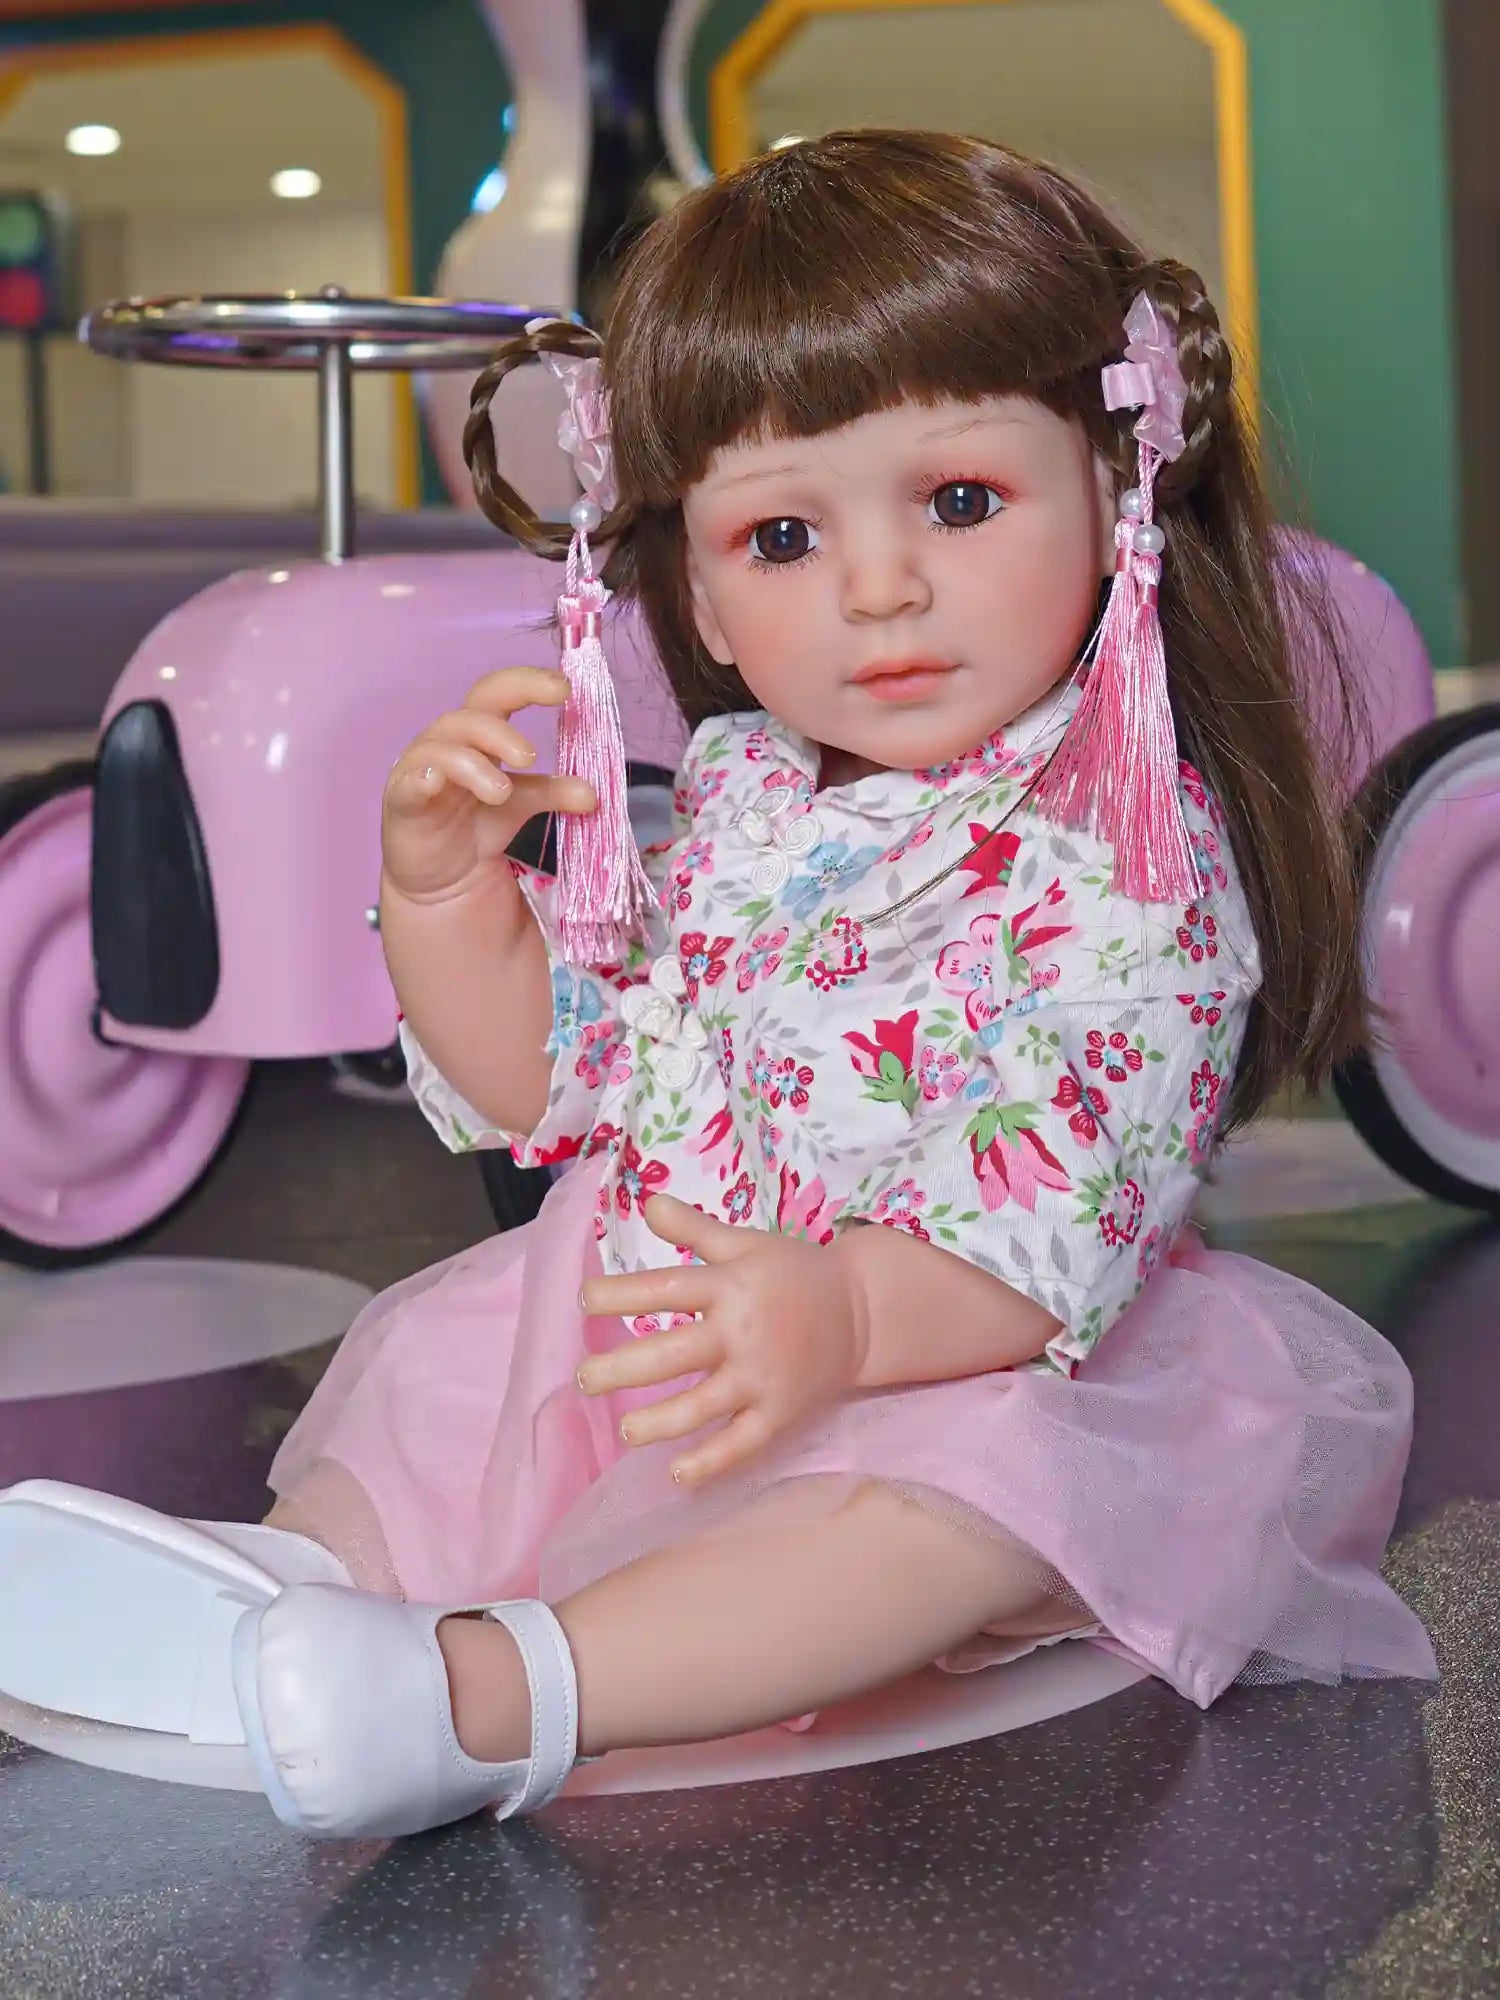 Close-up of a toddler doll in a pink and white floral kimono dress with pink ribbon hair accessories, posed playfully.